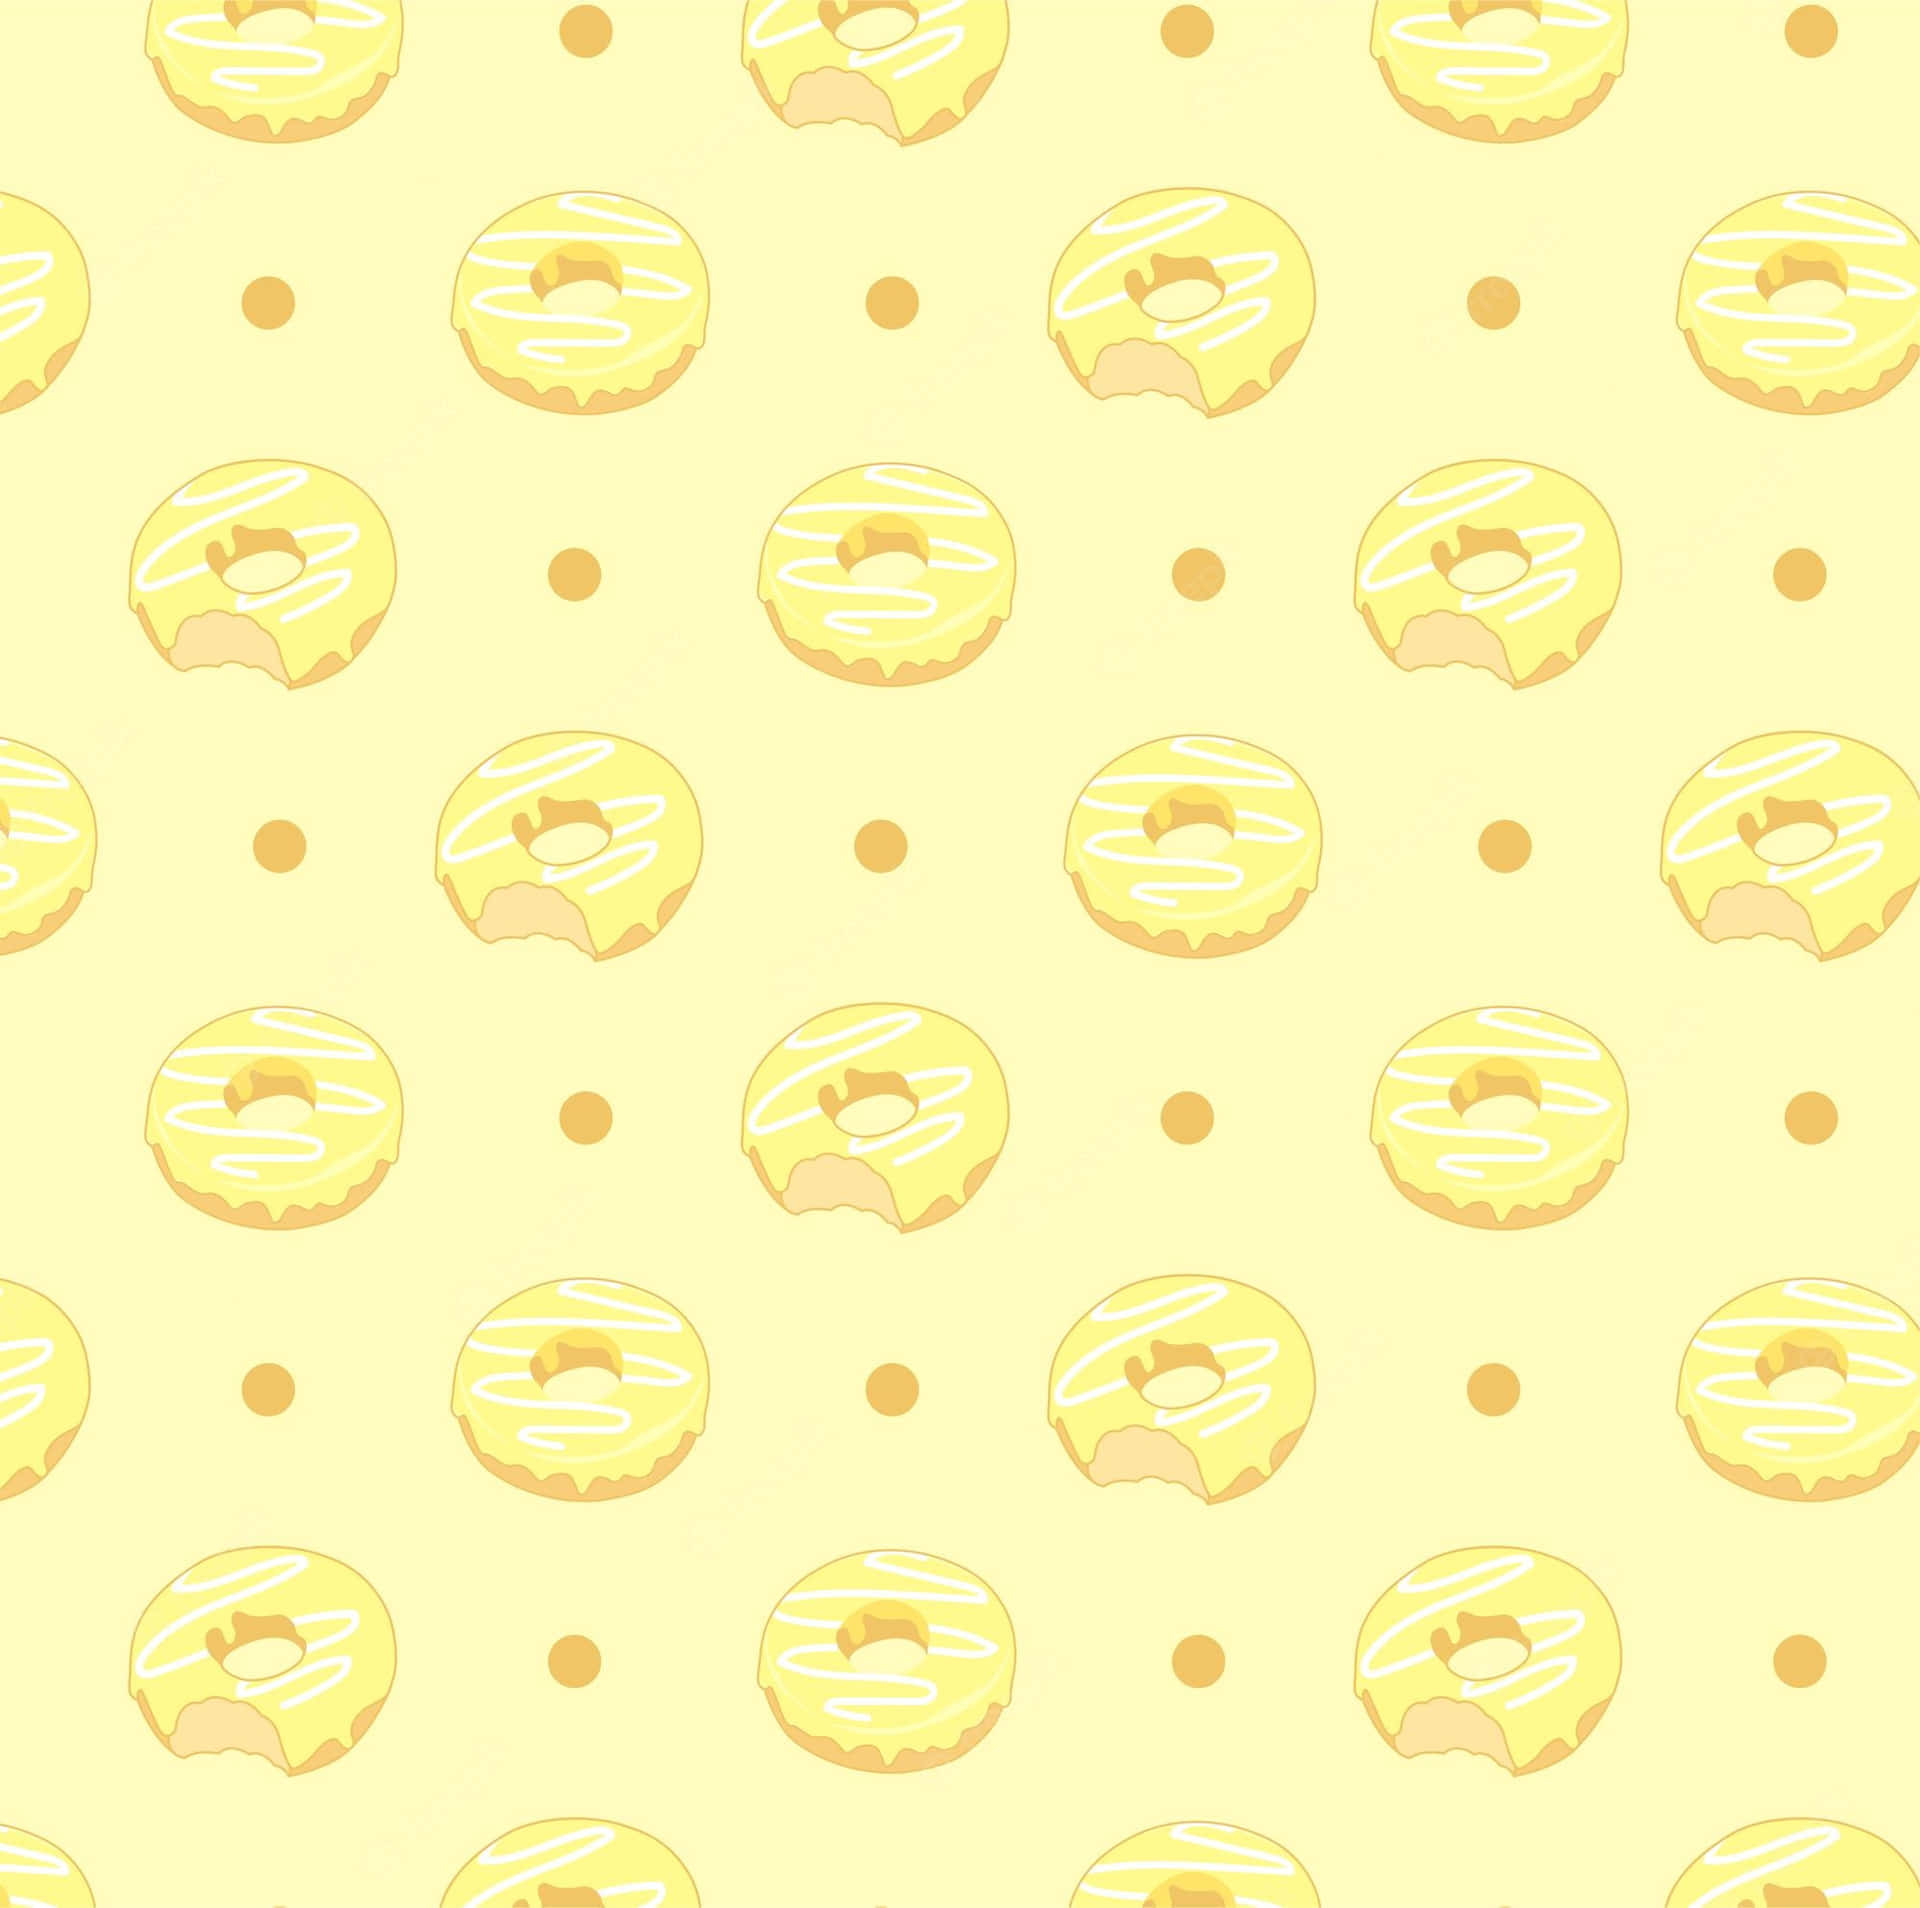 Brighten Up Your Day with This Kawaii Yellow Character Wallpaper